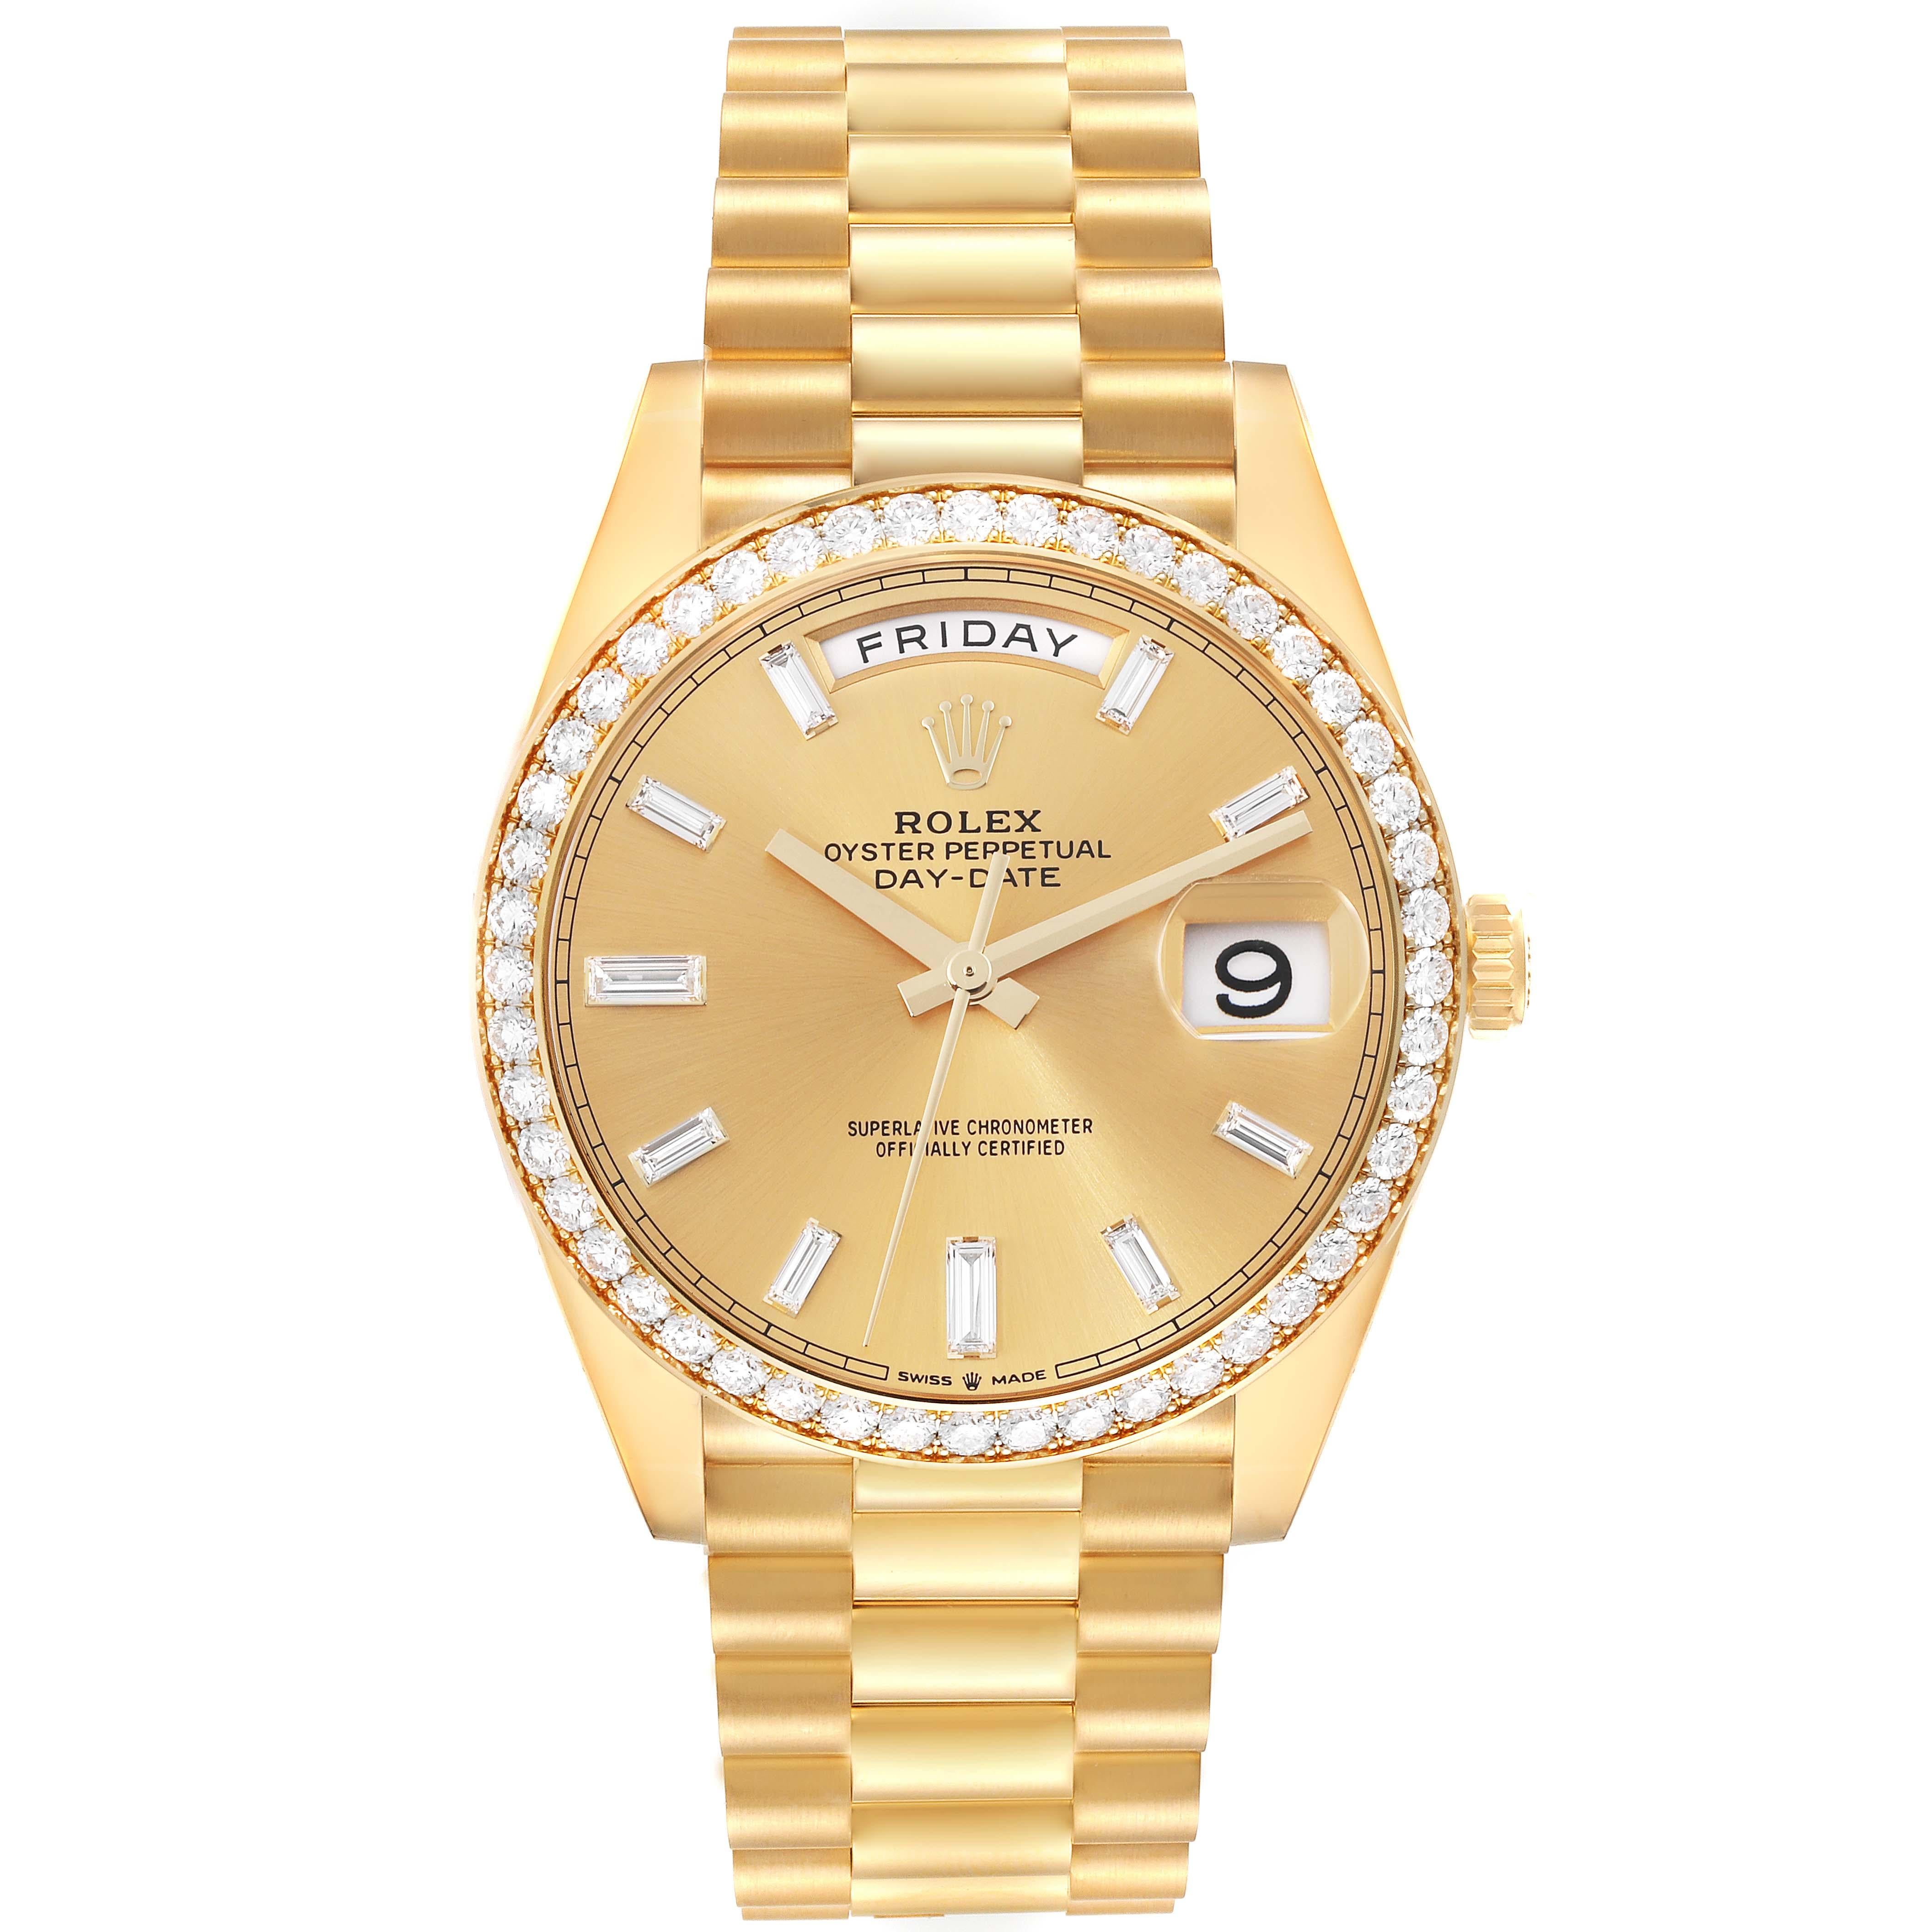 Rolex Day-Date 40 President Yellow Gold Diamond Bezel Mens Watch 228348 Box Card. Officially certified chronometer automatic self-winding movement. 18K yellow gold Oyster case 40 mm in diameter. High polished lugs. Rolex logo on the crown. 18K